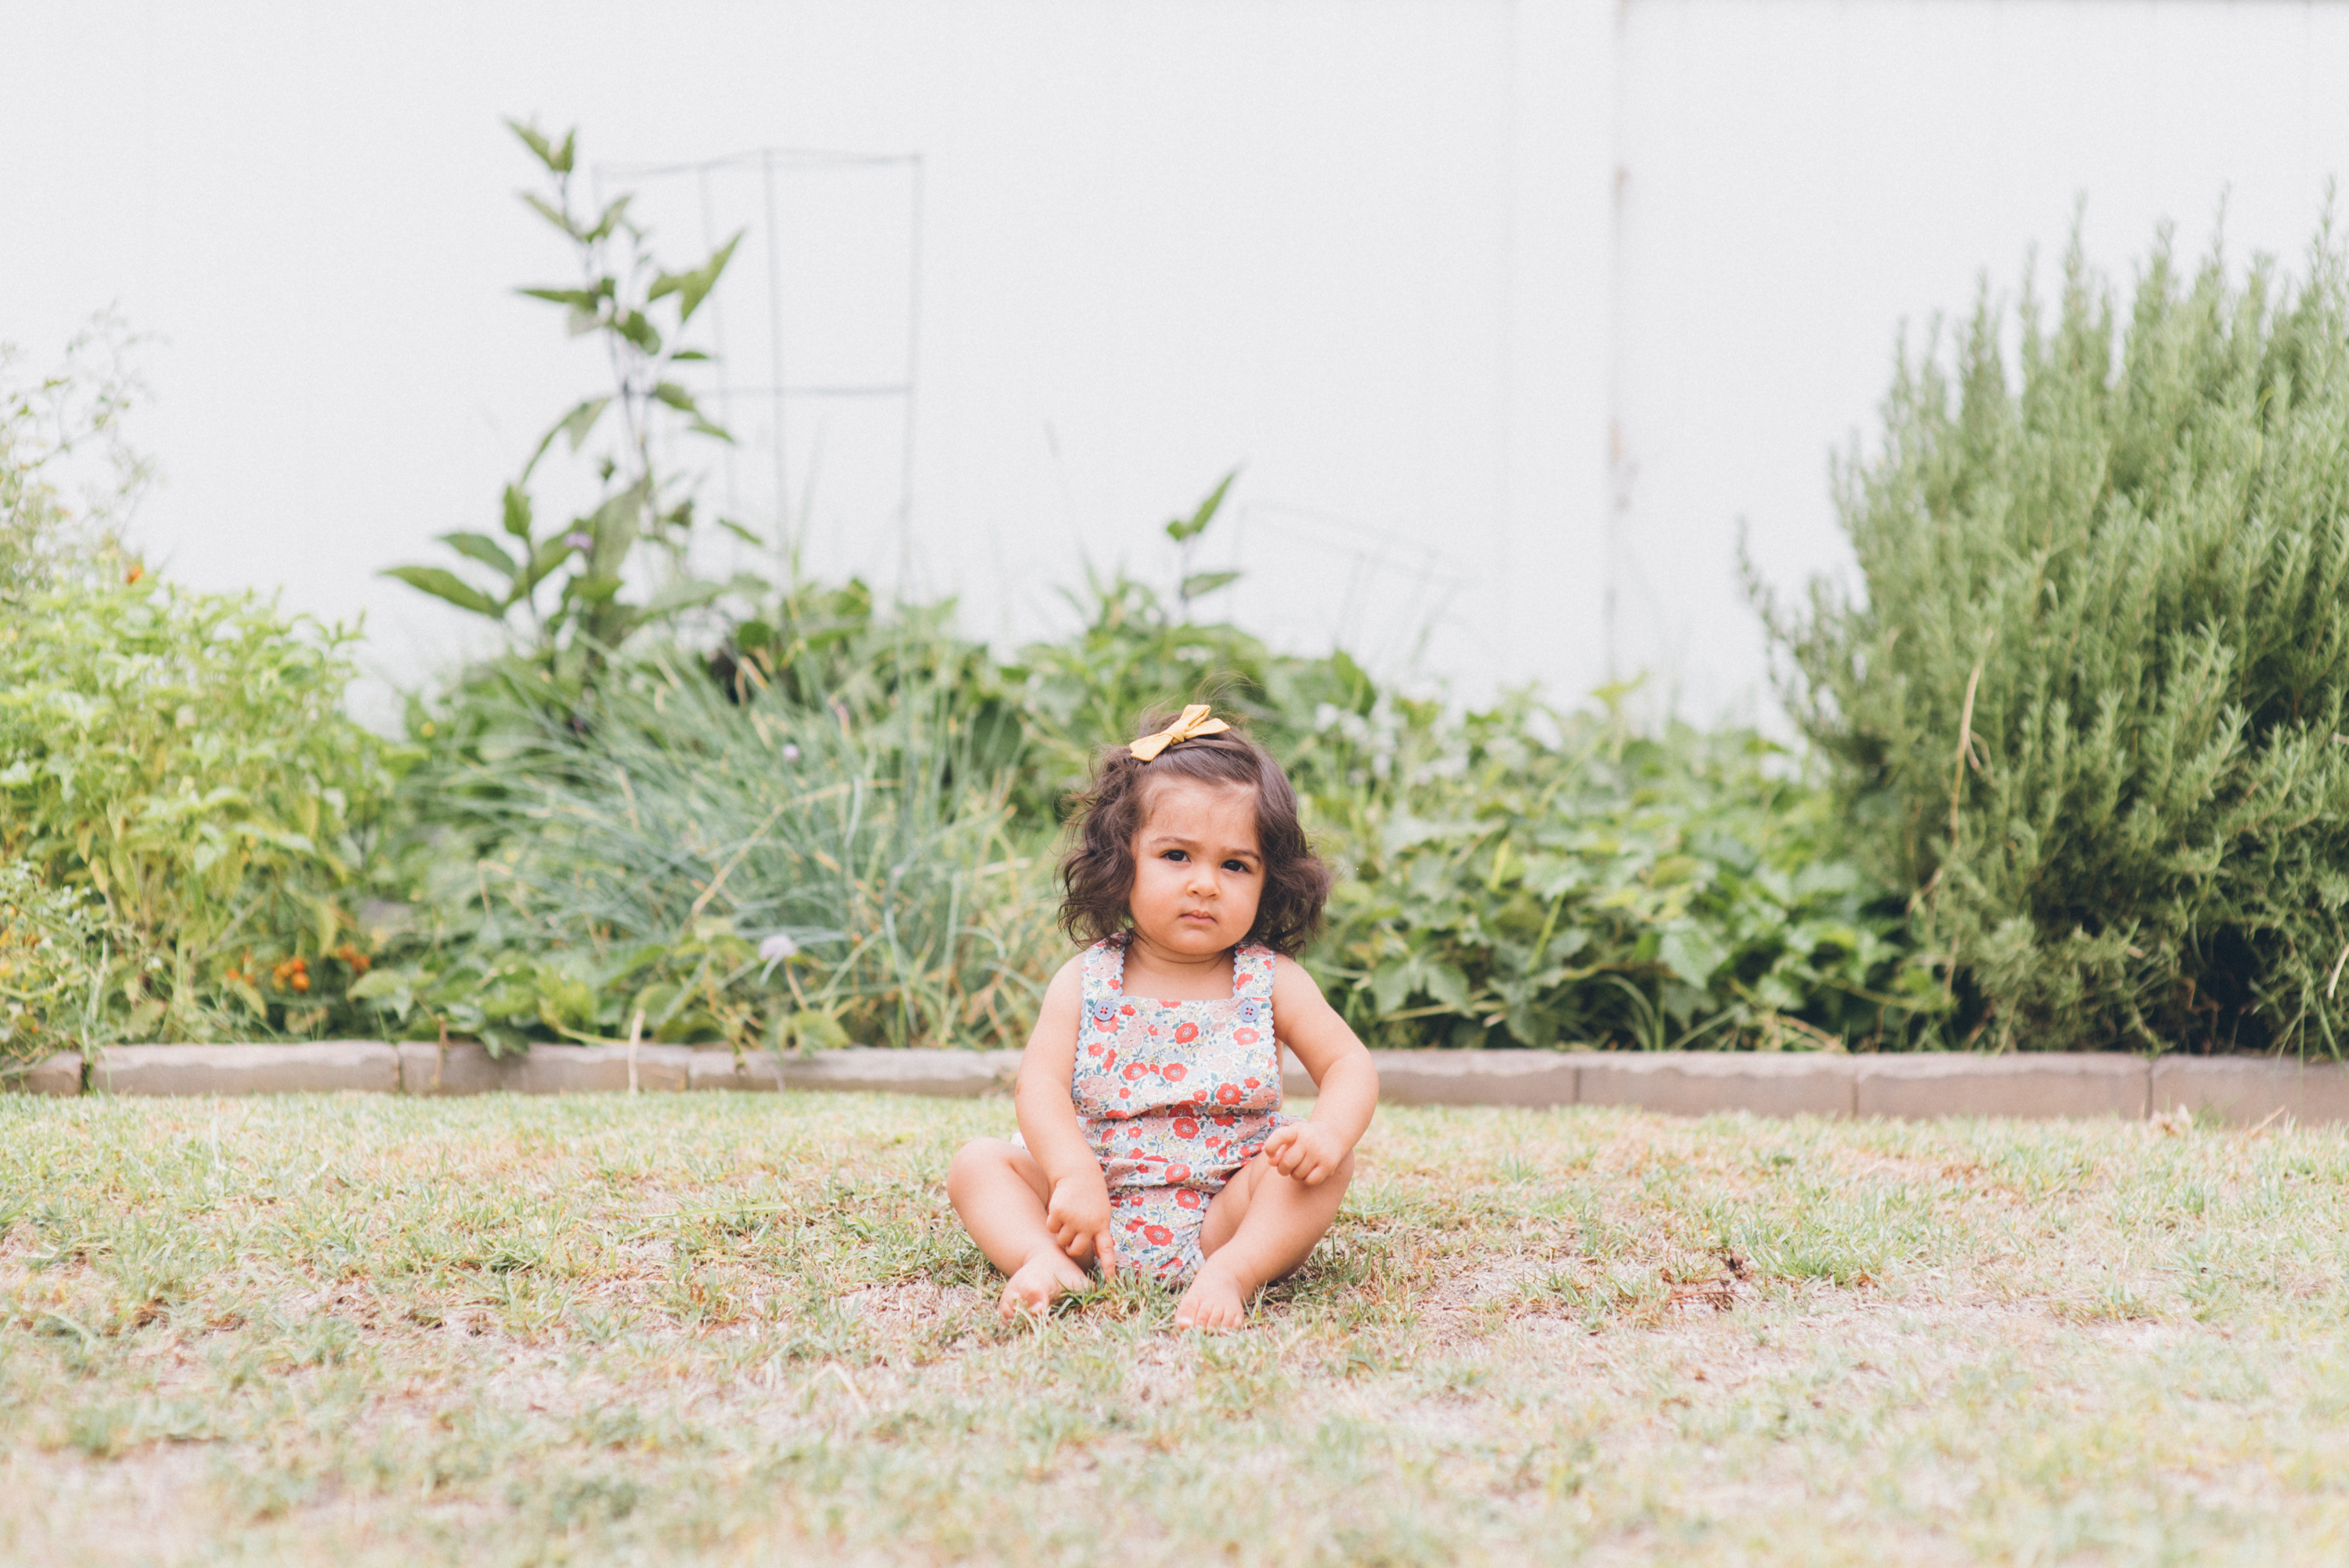 Child photography in Burbank, CA